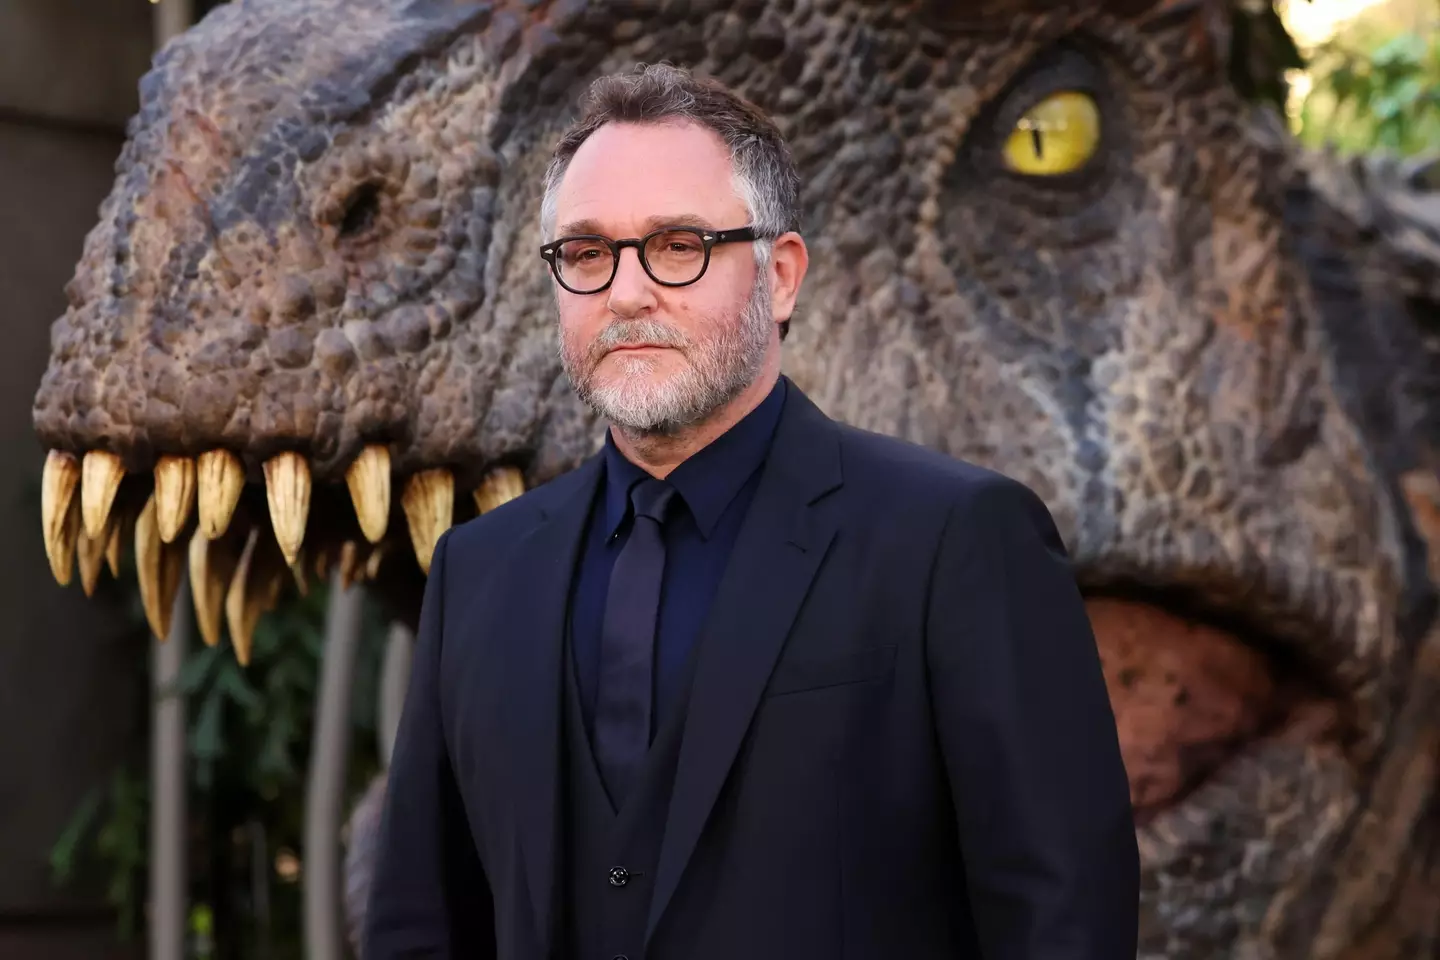 Colin Trevorrow has shared why he thinks Jurassic Park is 'unfranchiseable'.